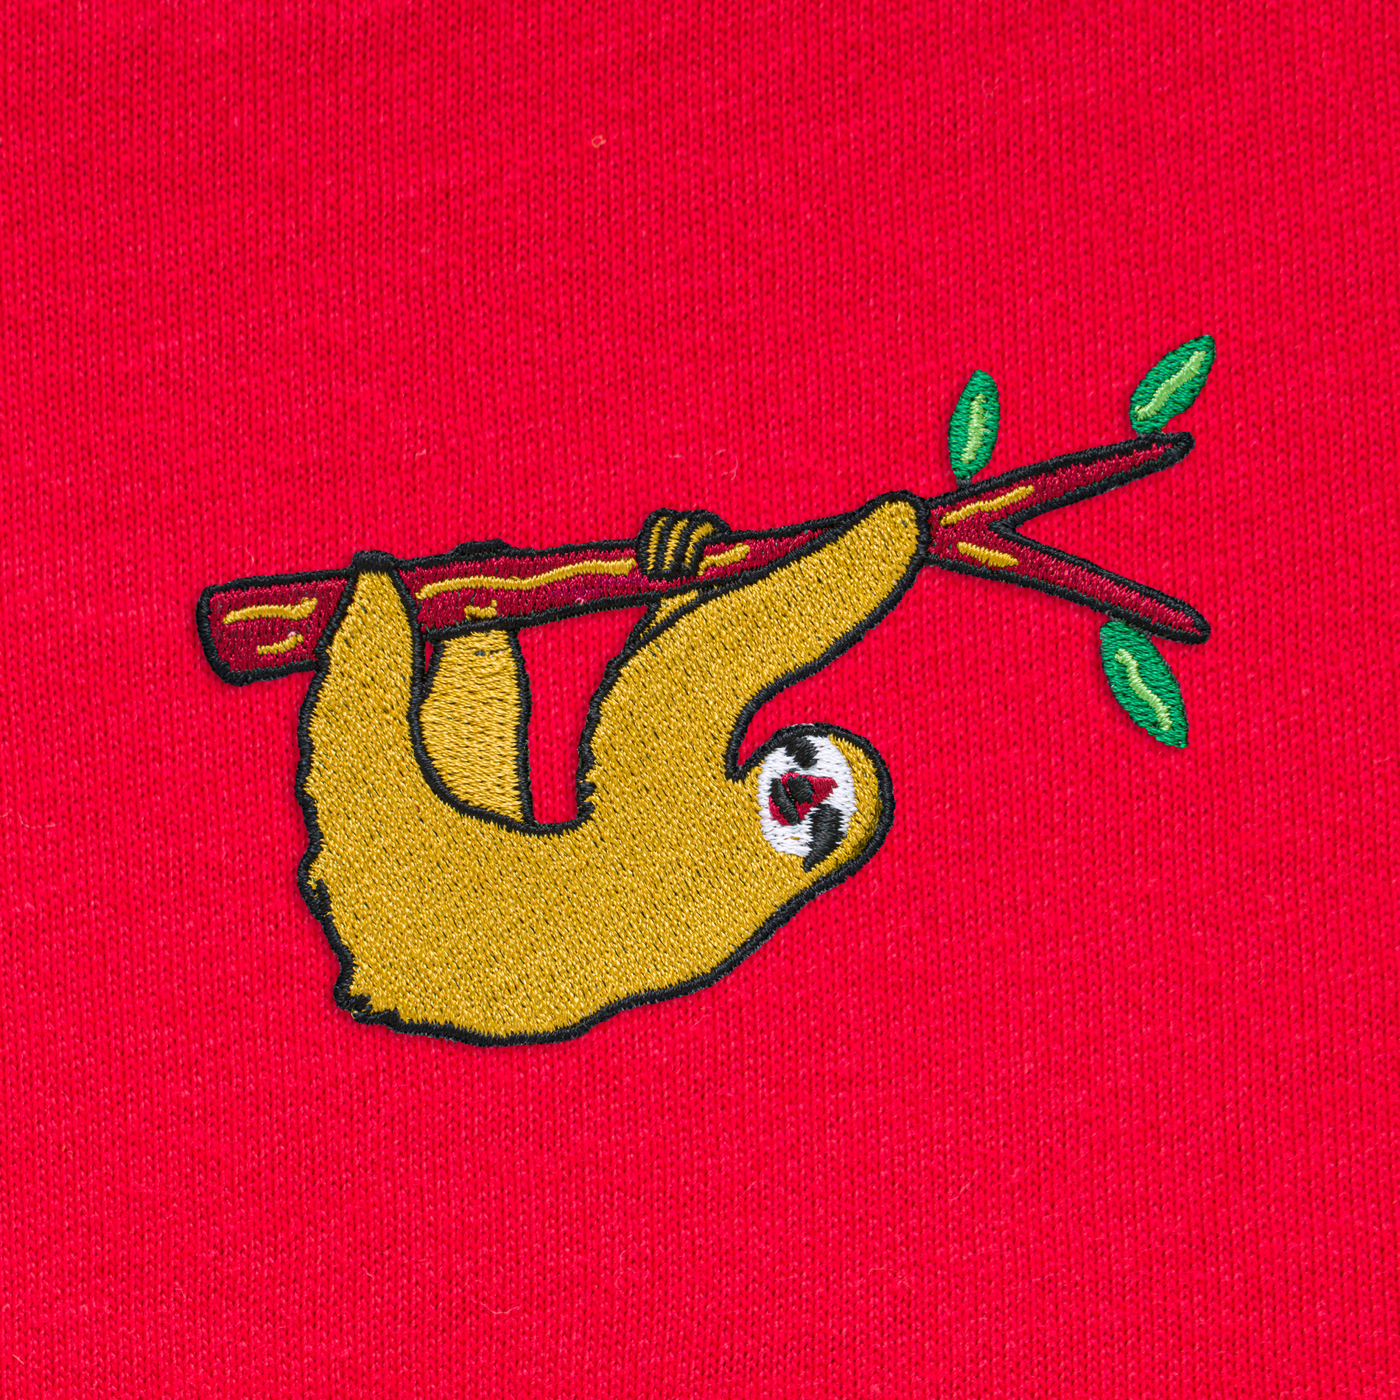 Bobby's Planet Kids Embroidered Sloth T-Shirt from South American Amazon Animals Collection in Red Color#color_red